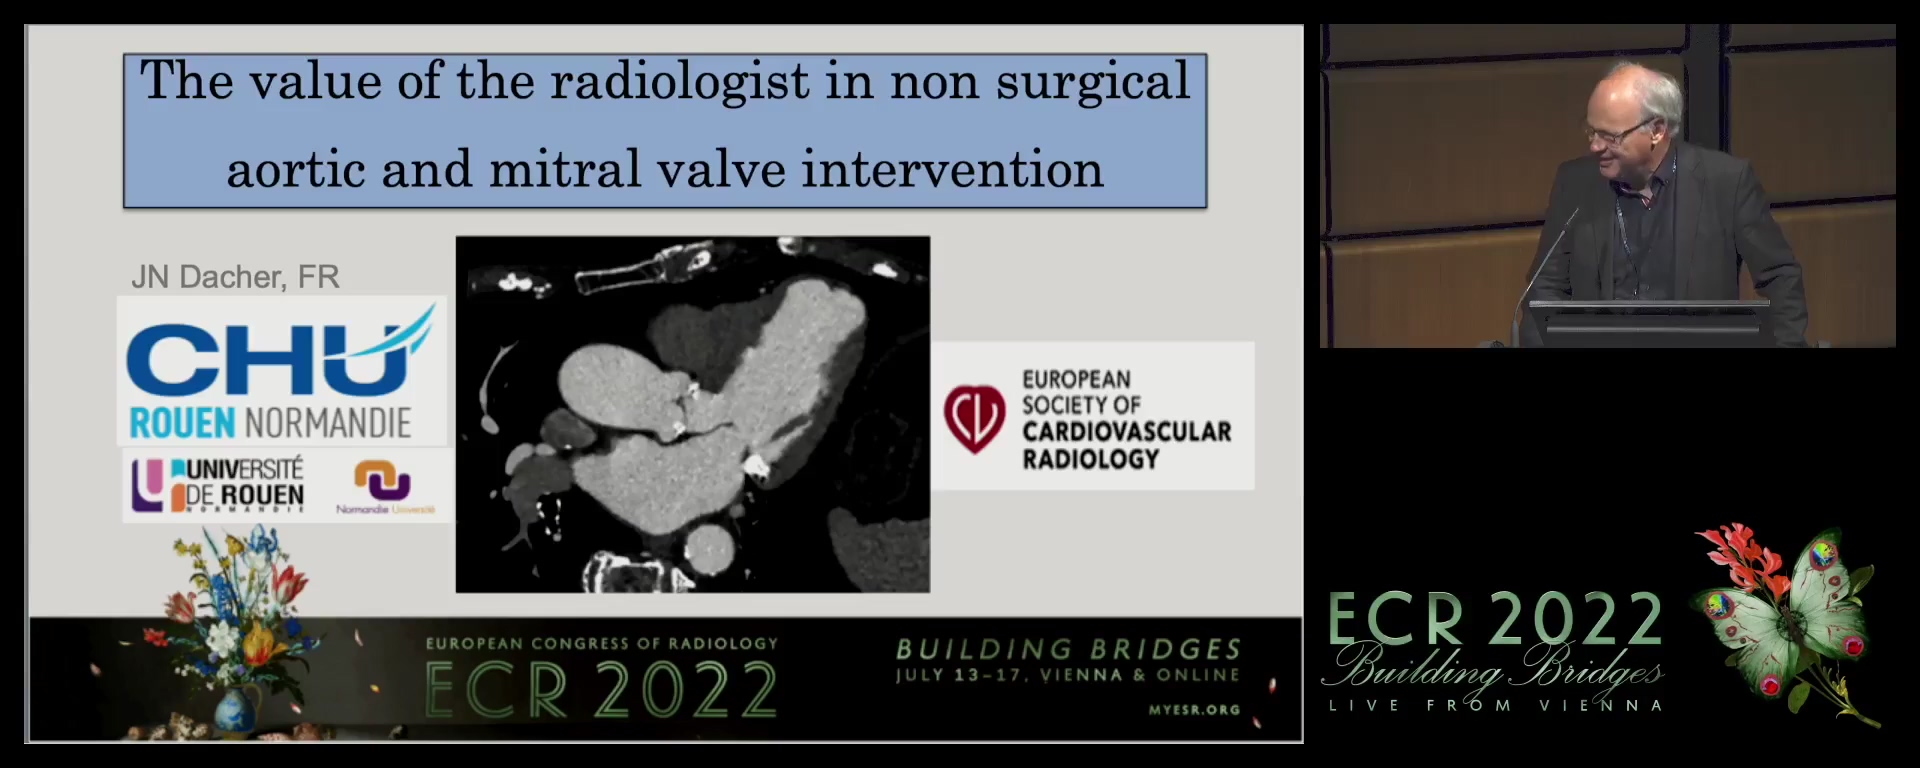 The value of the radiologist in non-surgical aortic and mitral valve intervention